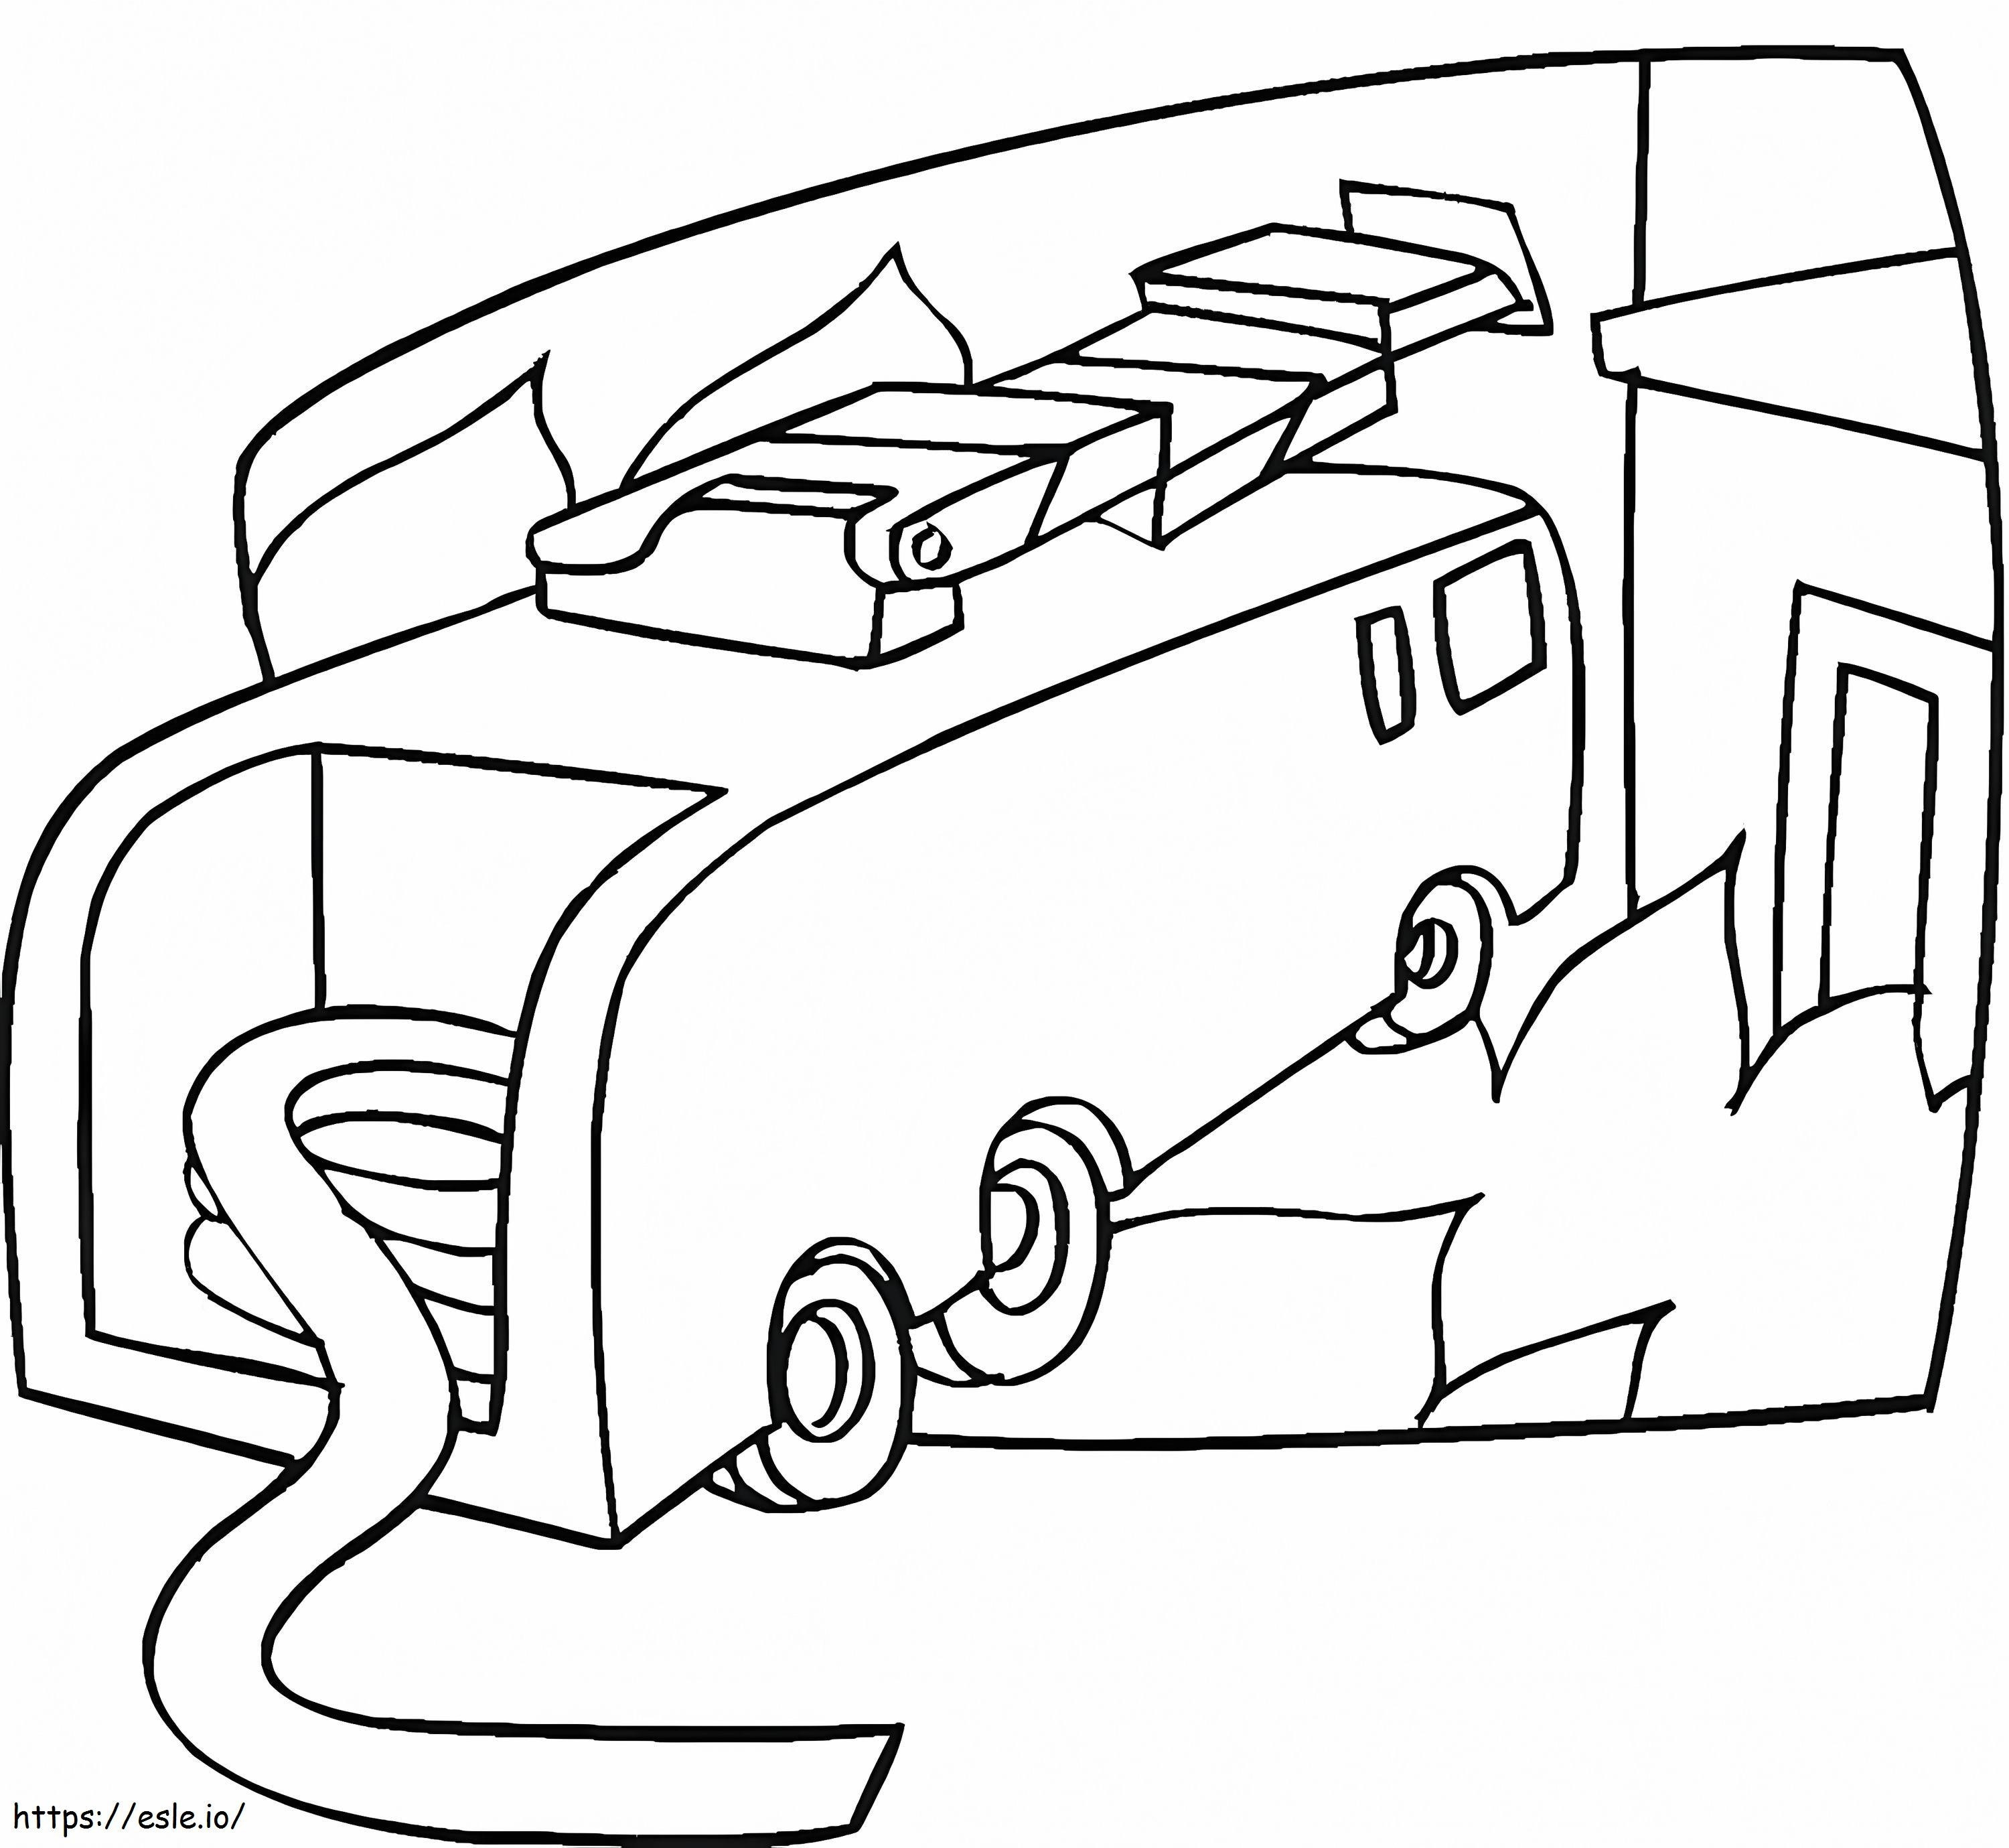 1584002165 Fire Car Is Readyfa coloring page